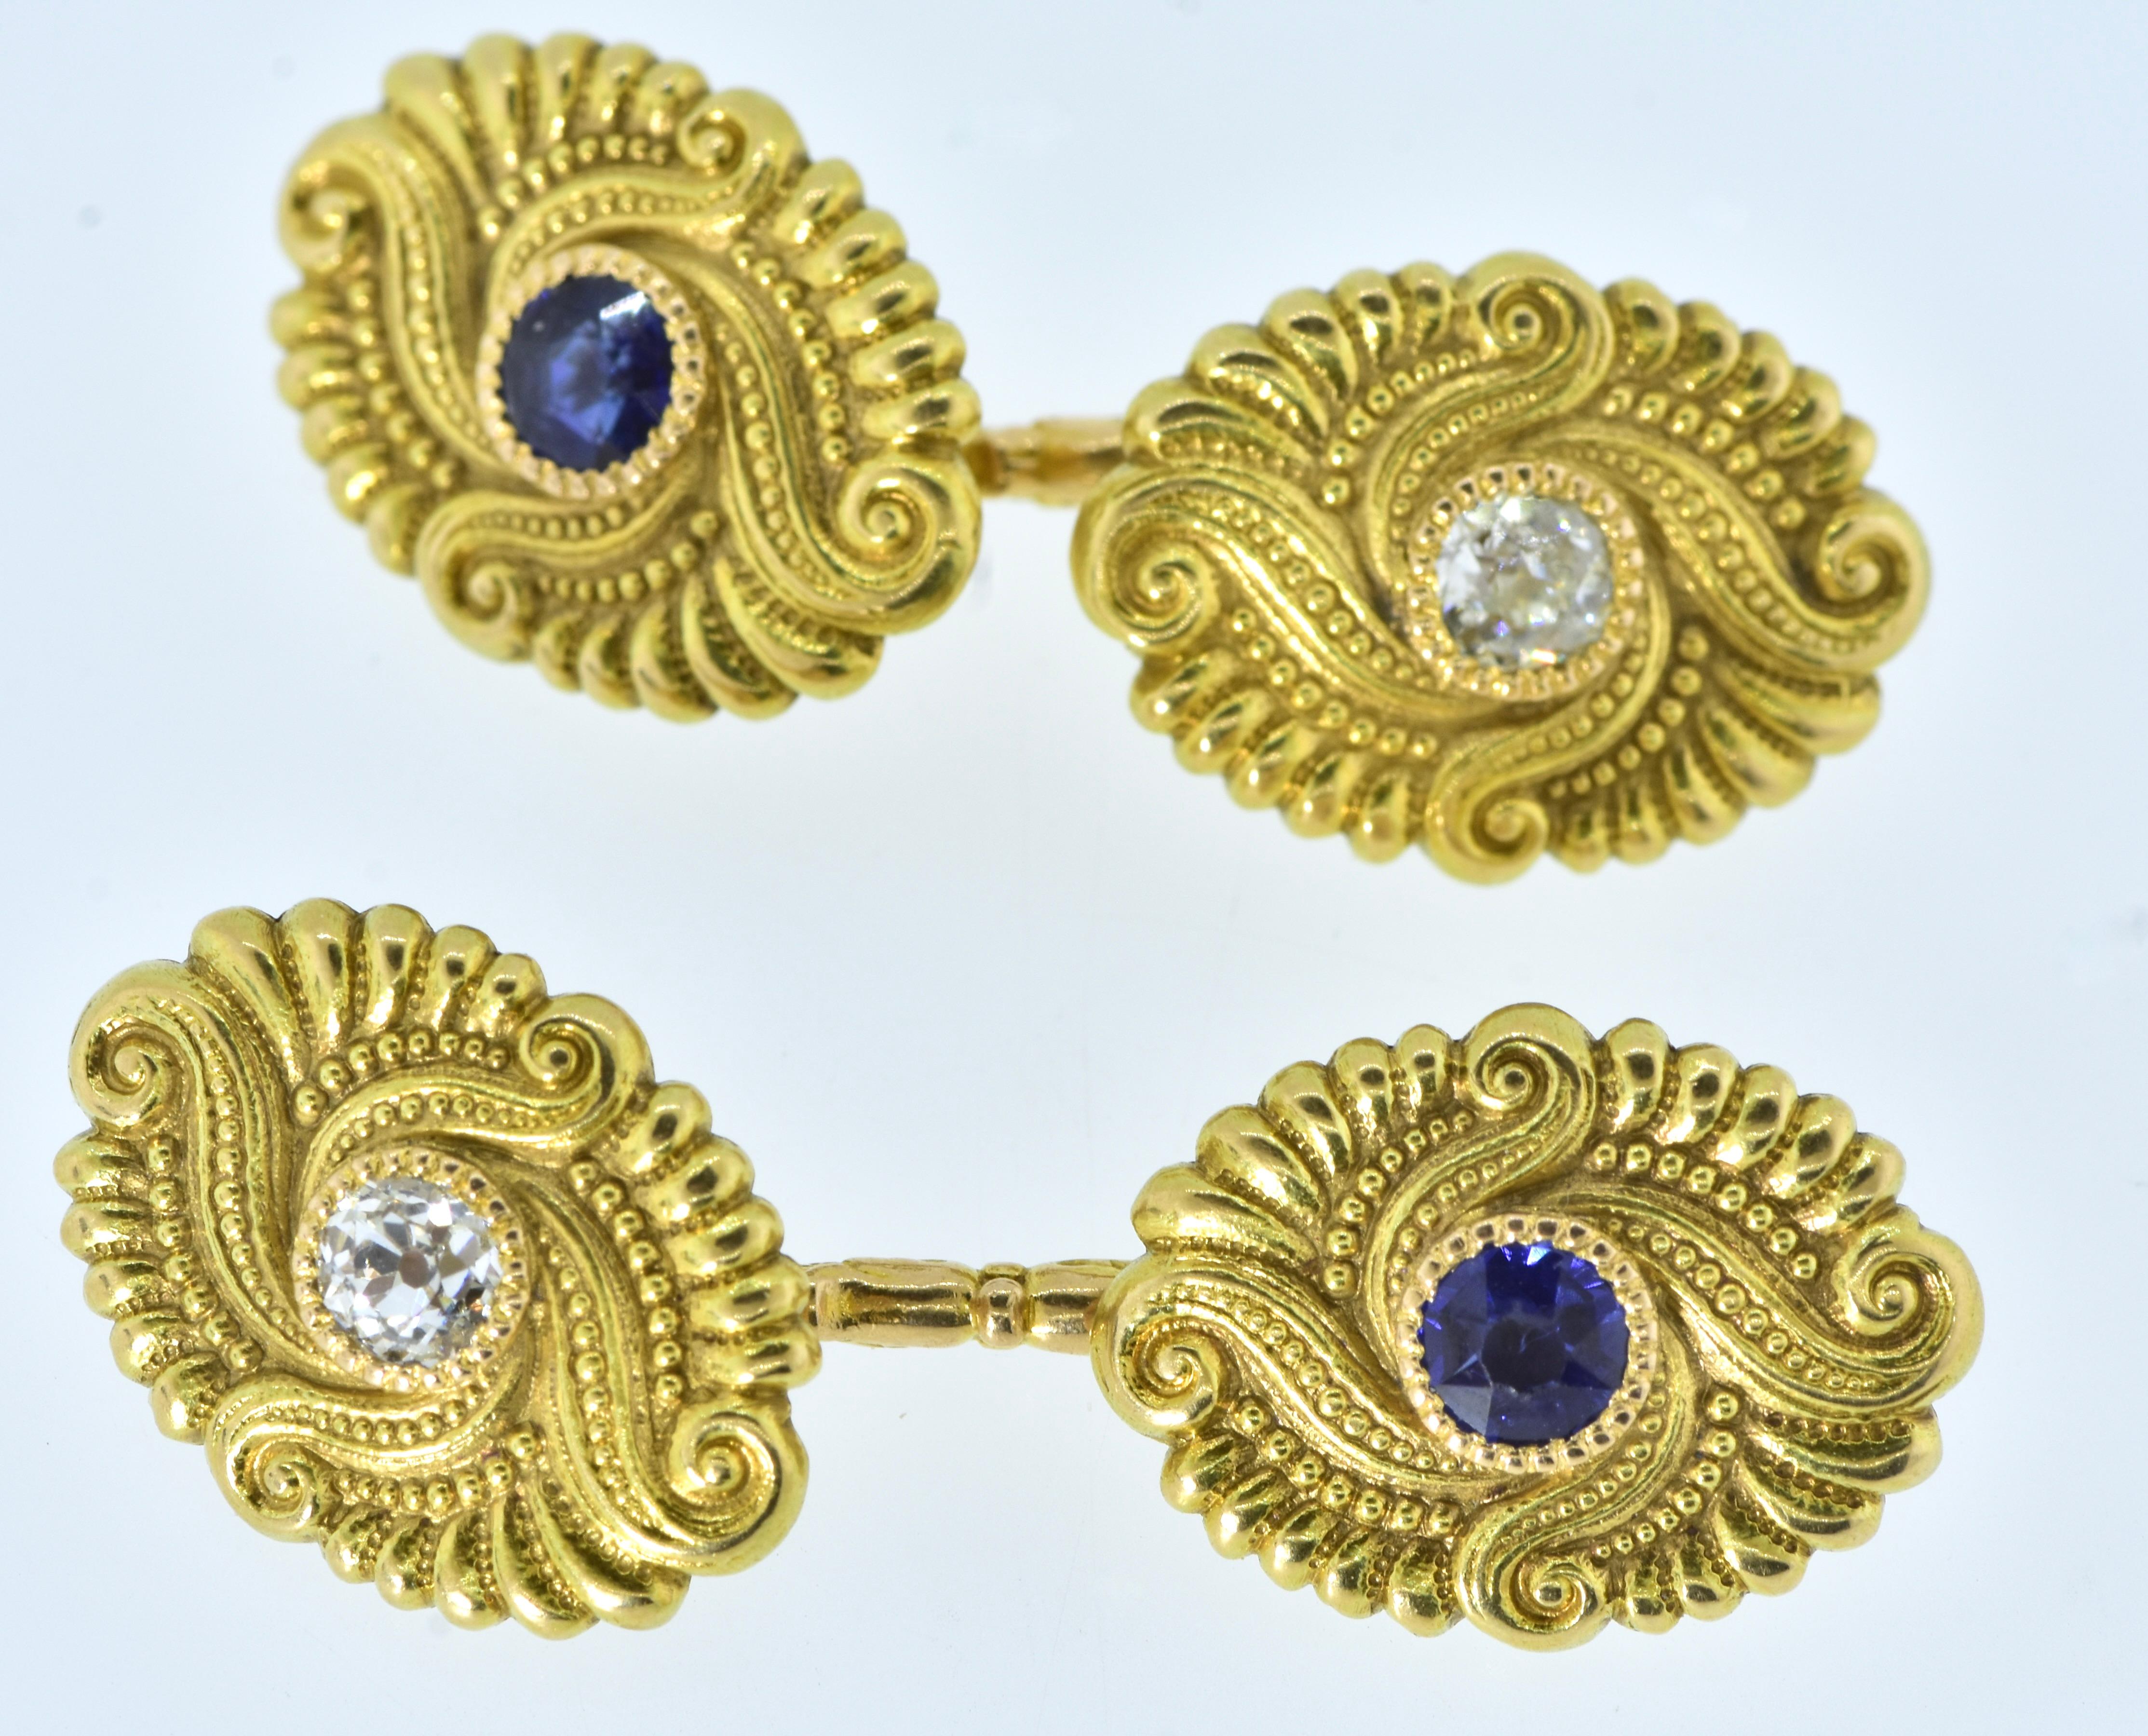 Antique cufflinks yellow gold  with European cut white diamonds weighing totally .40 cts.,  and bright vivid blue unheated sapphires weighing .45 cts. These distinctive cufflinks are in fine condition, and are just under .75 inches long.  They weigh